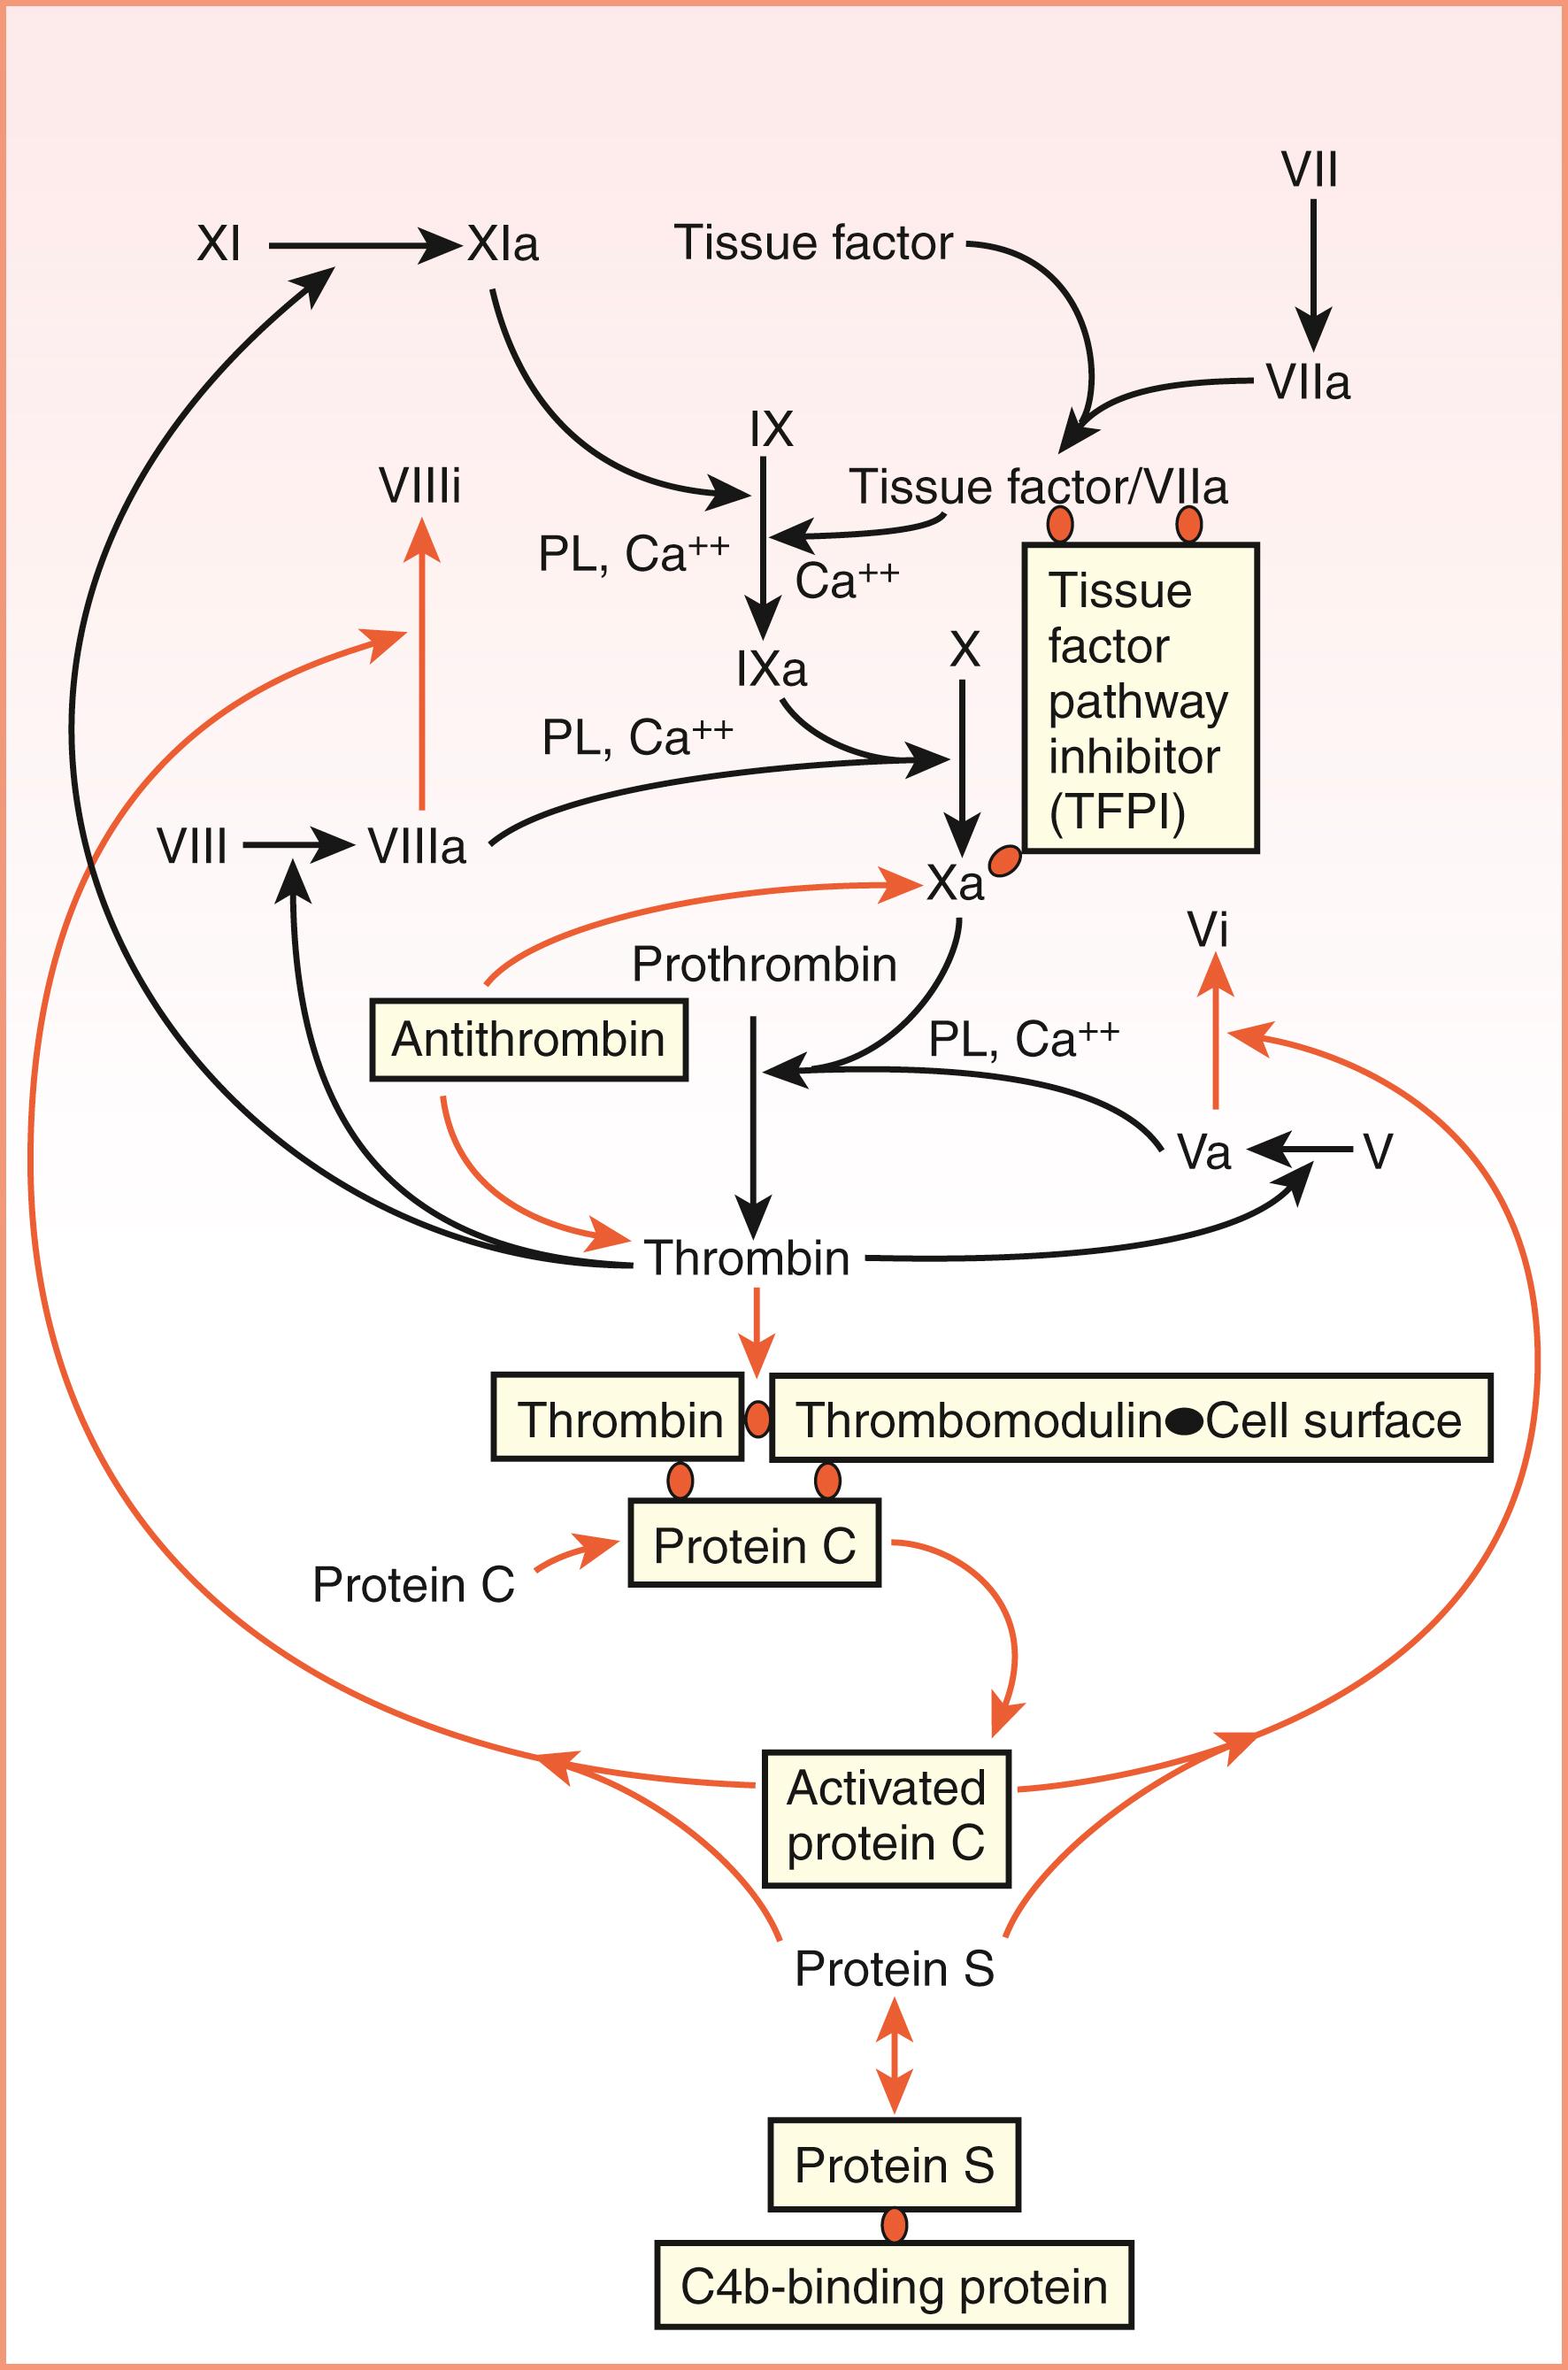 Figure 40.5, Natural inhibitors of coagulation: antithrombin (AT); components of the protein C pathway (thrombomodulin, protein C, protein S); and tissue factor pathway inhibitor (TFPI). Three major anticoagulant systems are recognized. Antithrombin inhibits factor Xa and thrombin to prevent thrombosis. It is important to note that antithrombin inhibits every enzymatic form of blood coagulation serine proteases (factor XIIa, plasma kallikrein, factor XIa, factor IXa, and factor VIIa), even though this is not indicated in the figure for readability purposes. The protein C system requires that this zymogen is activated to activated protein C by thrombin when bound to the endothelial cell membrane protein thrombomodulin. Protein S is a cofactor for activated protein C to inactivate factors Va and VIIIa. C4b-binding protein regulates protein S activity. TFPI makes a quaternary complex with tissue factor/factor VIIa and factor Xa to inhibit both enzymes.